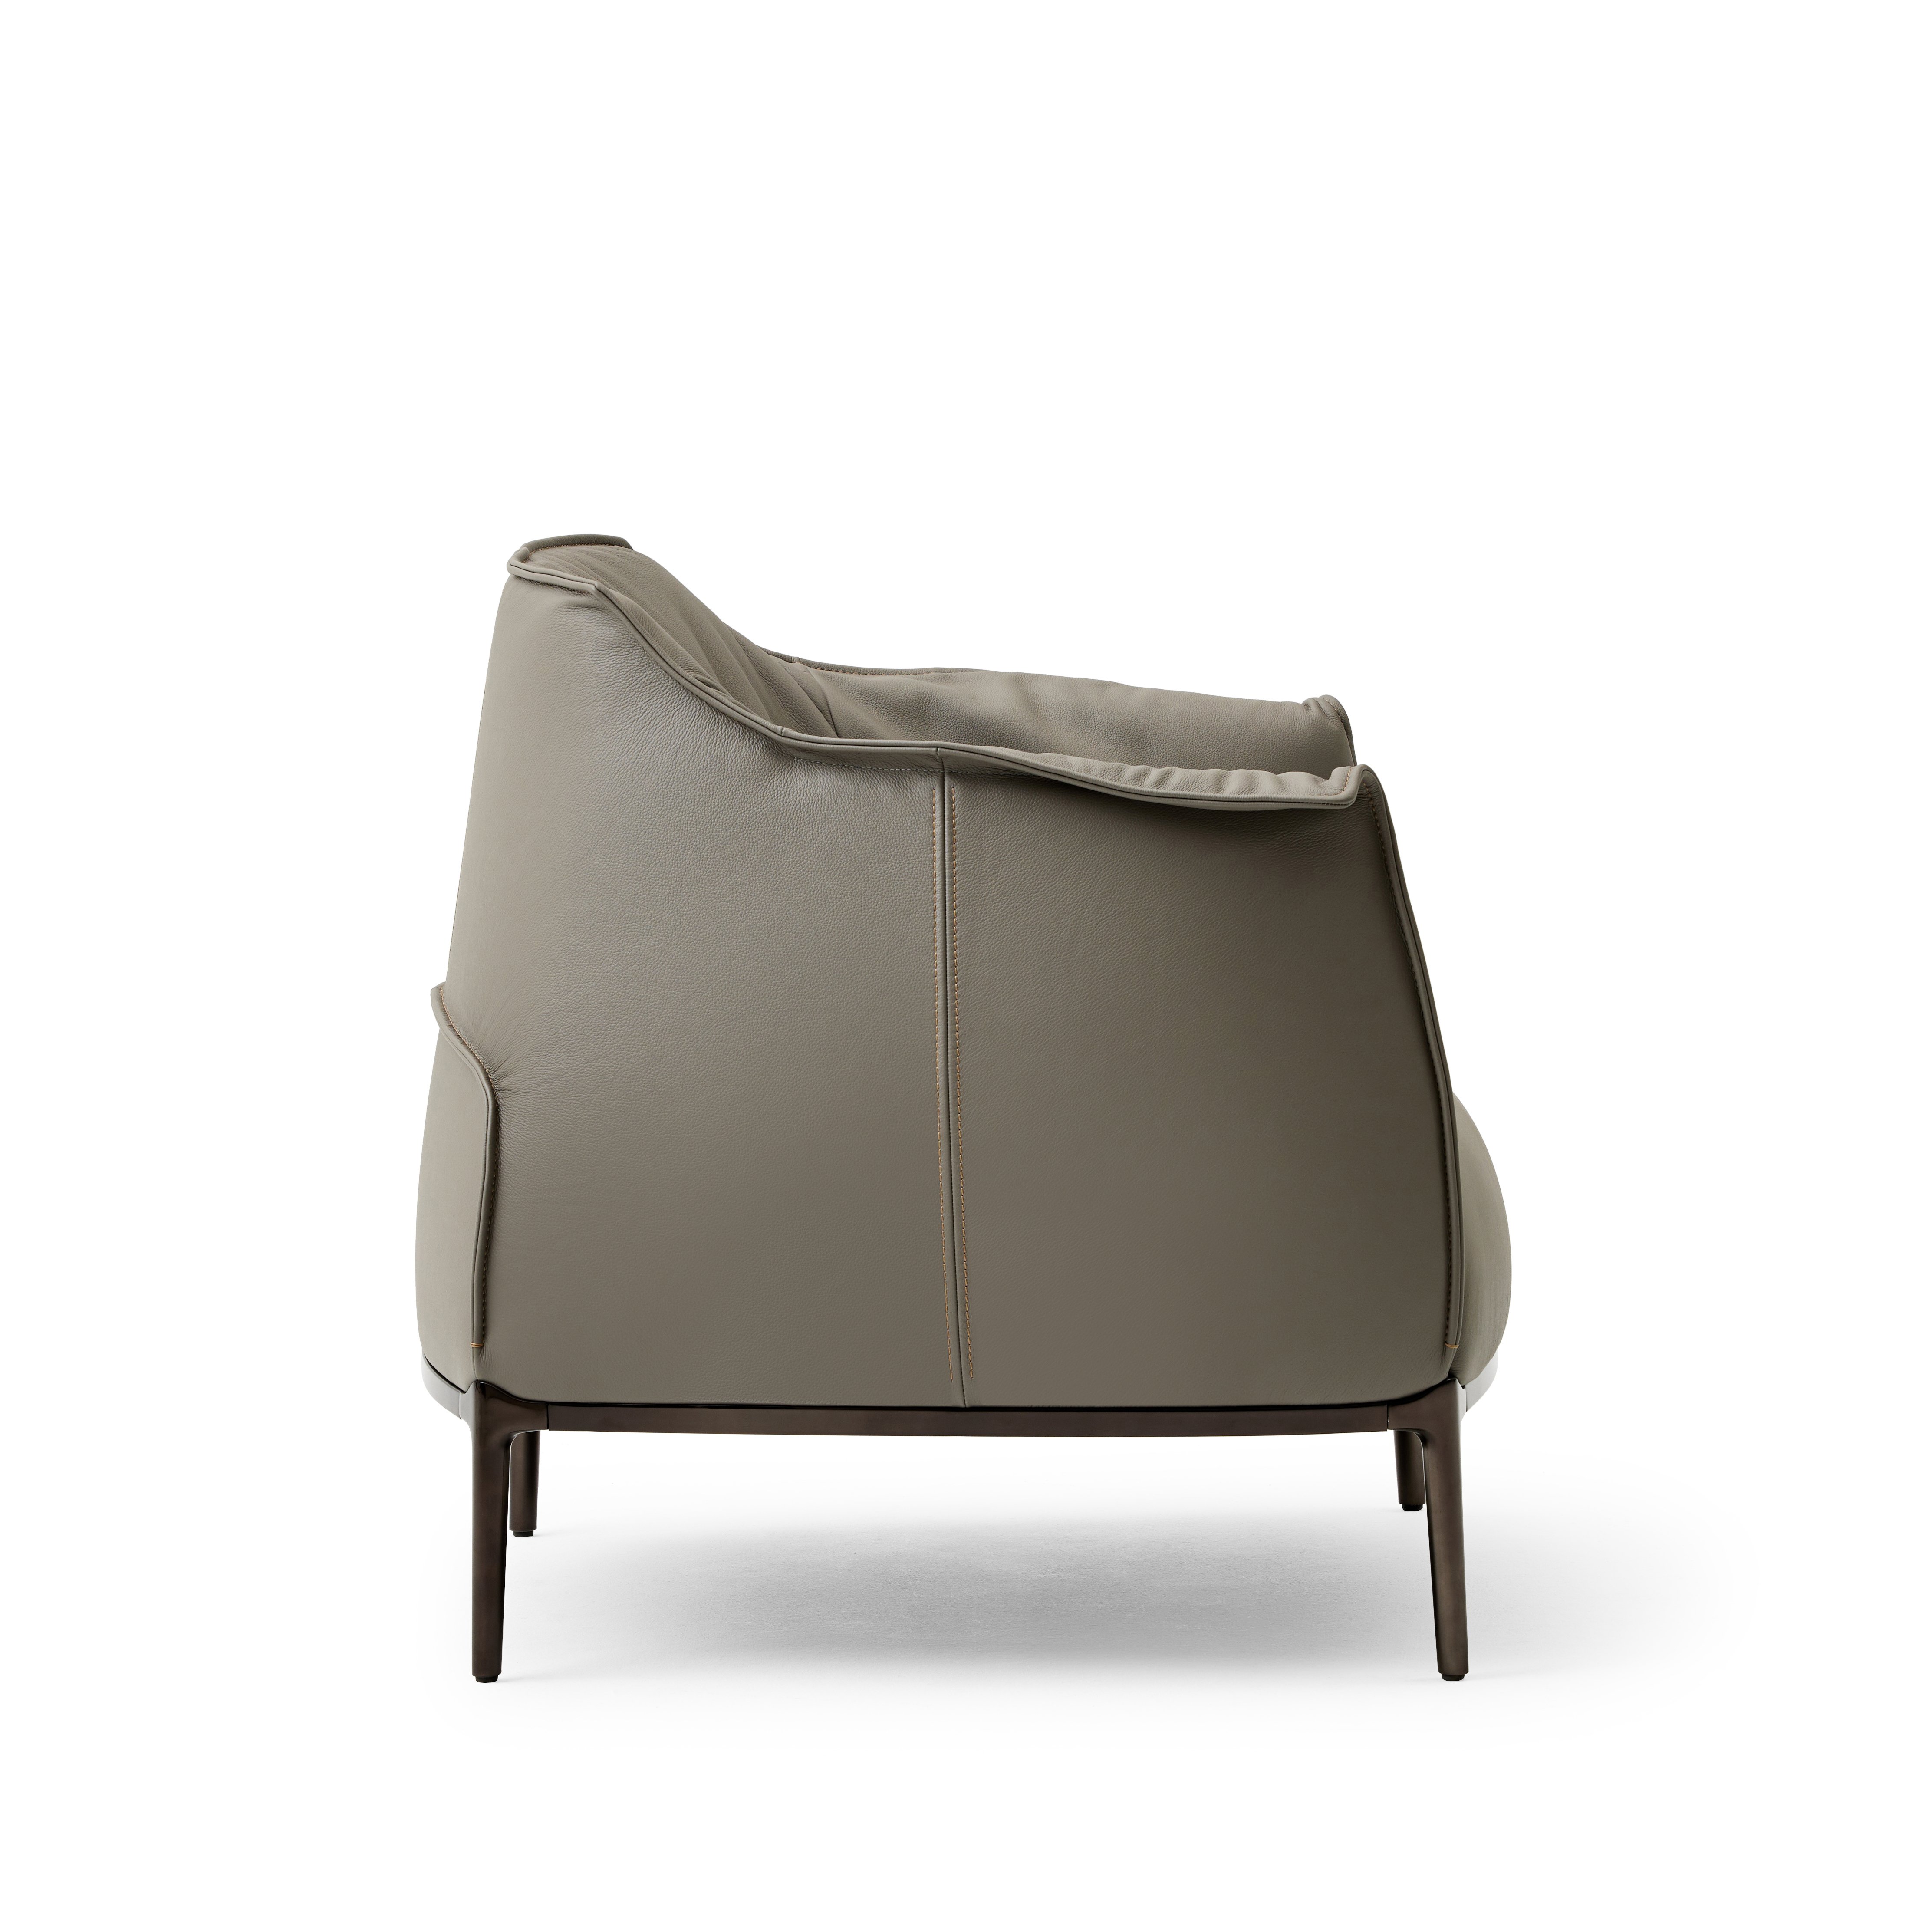 Detail side shot of the Archibald Lounge chair in Gray